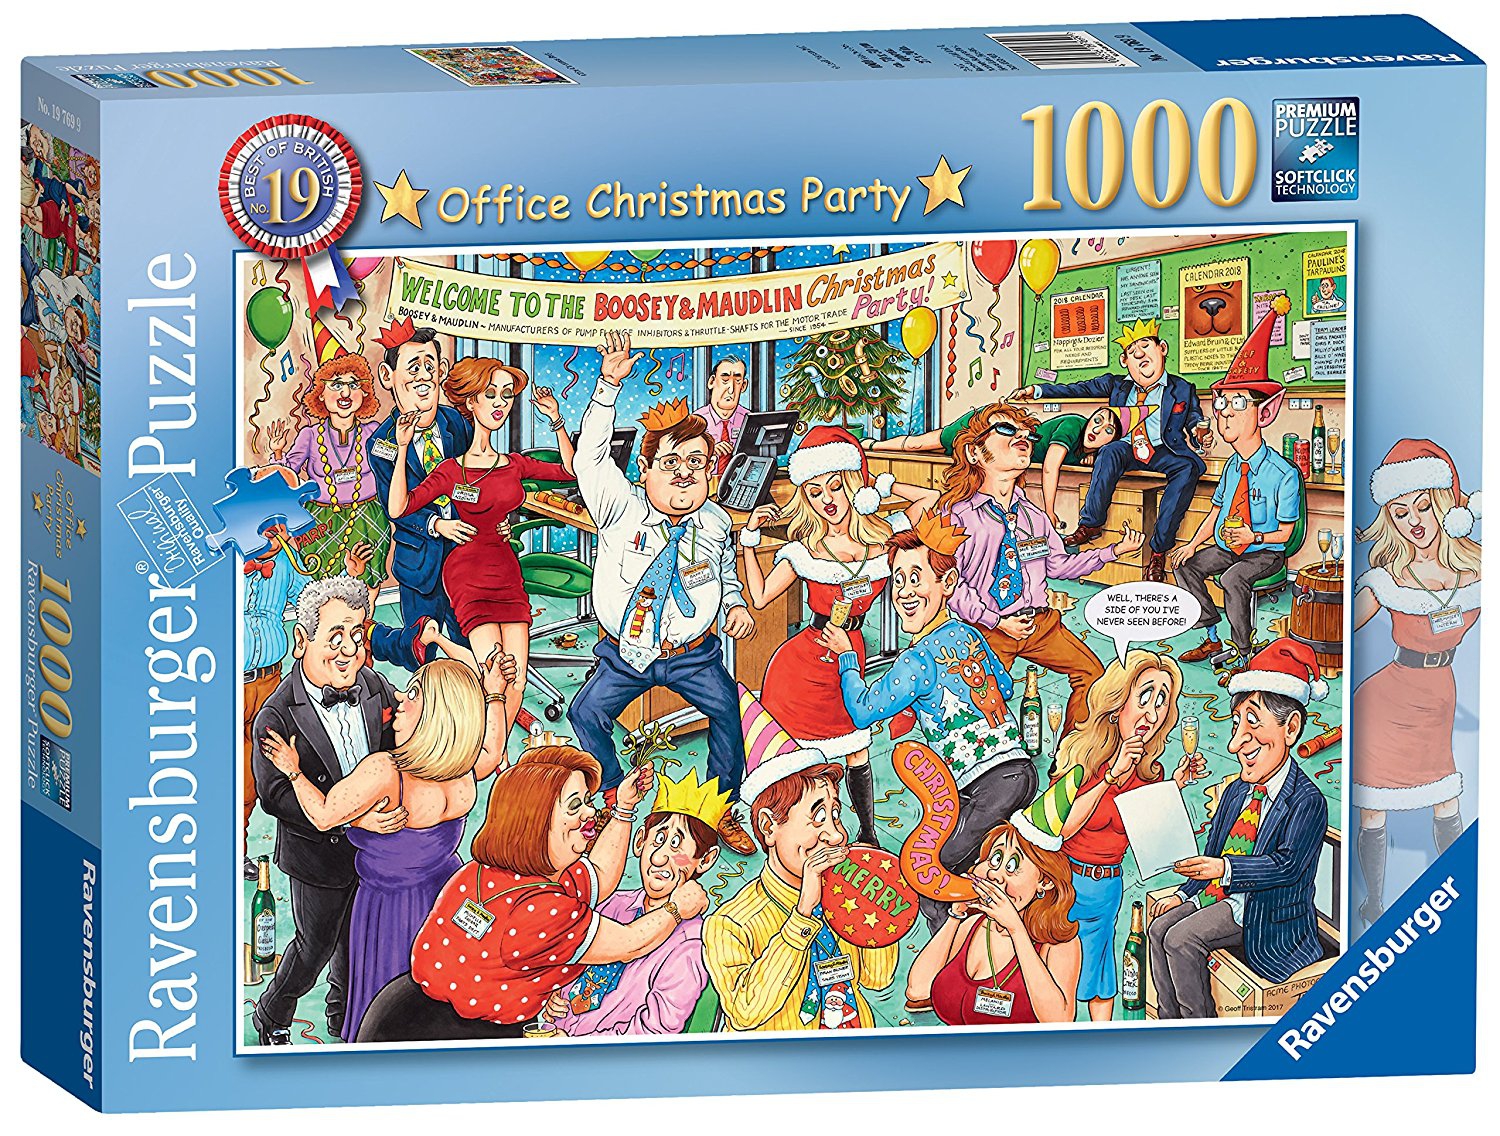 Best of British - Christmas Party 1000 Piece Jigsaw Puzzle Game